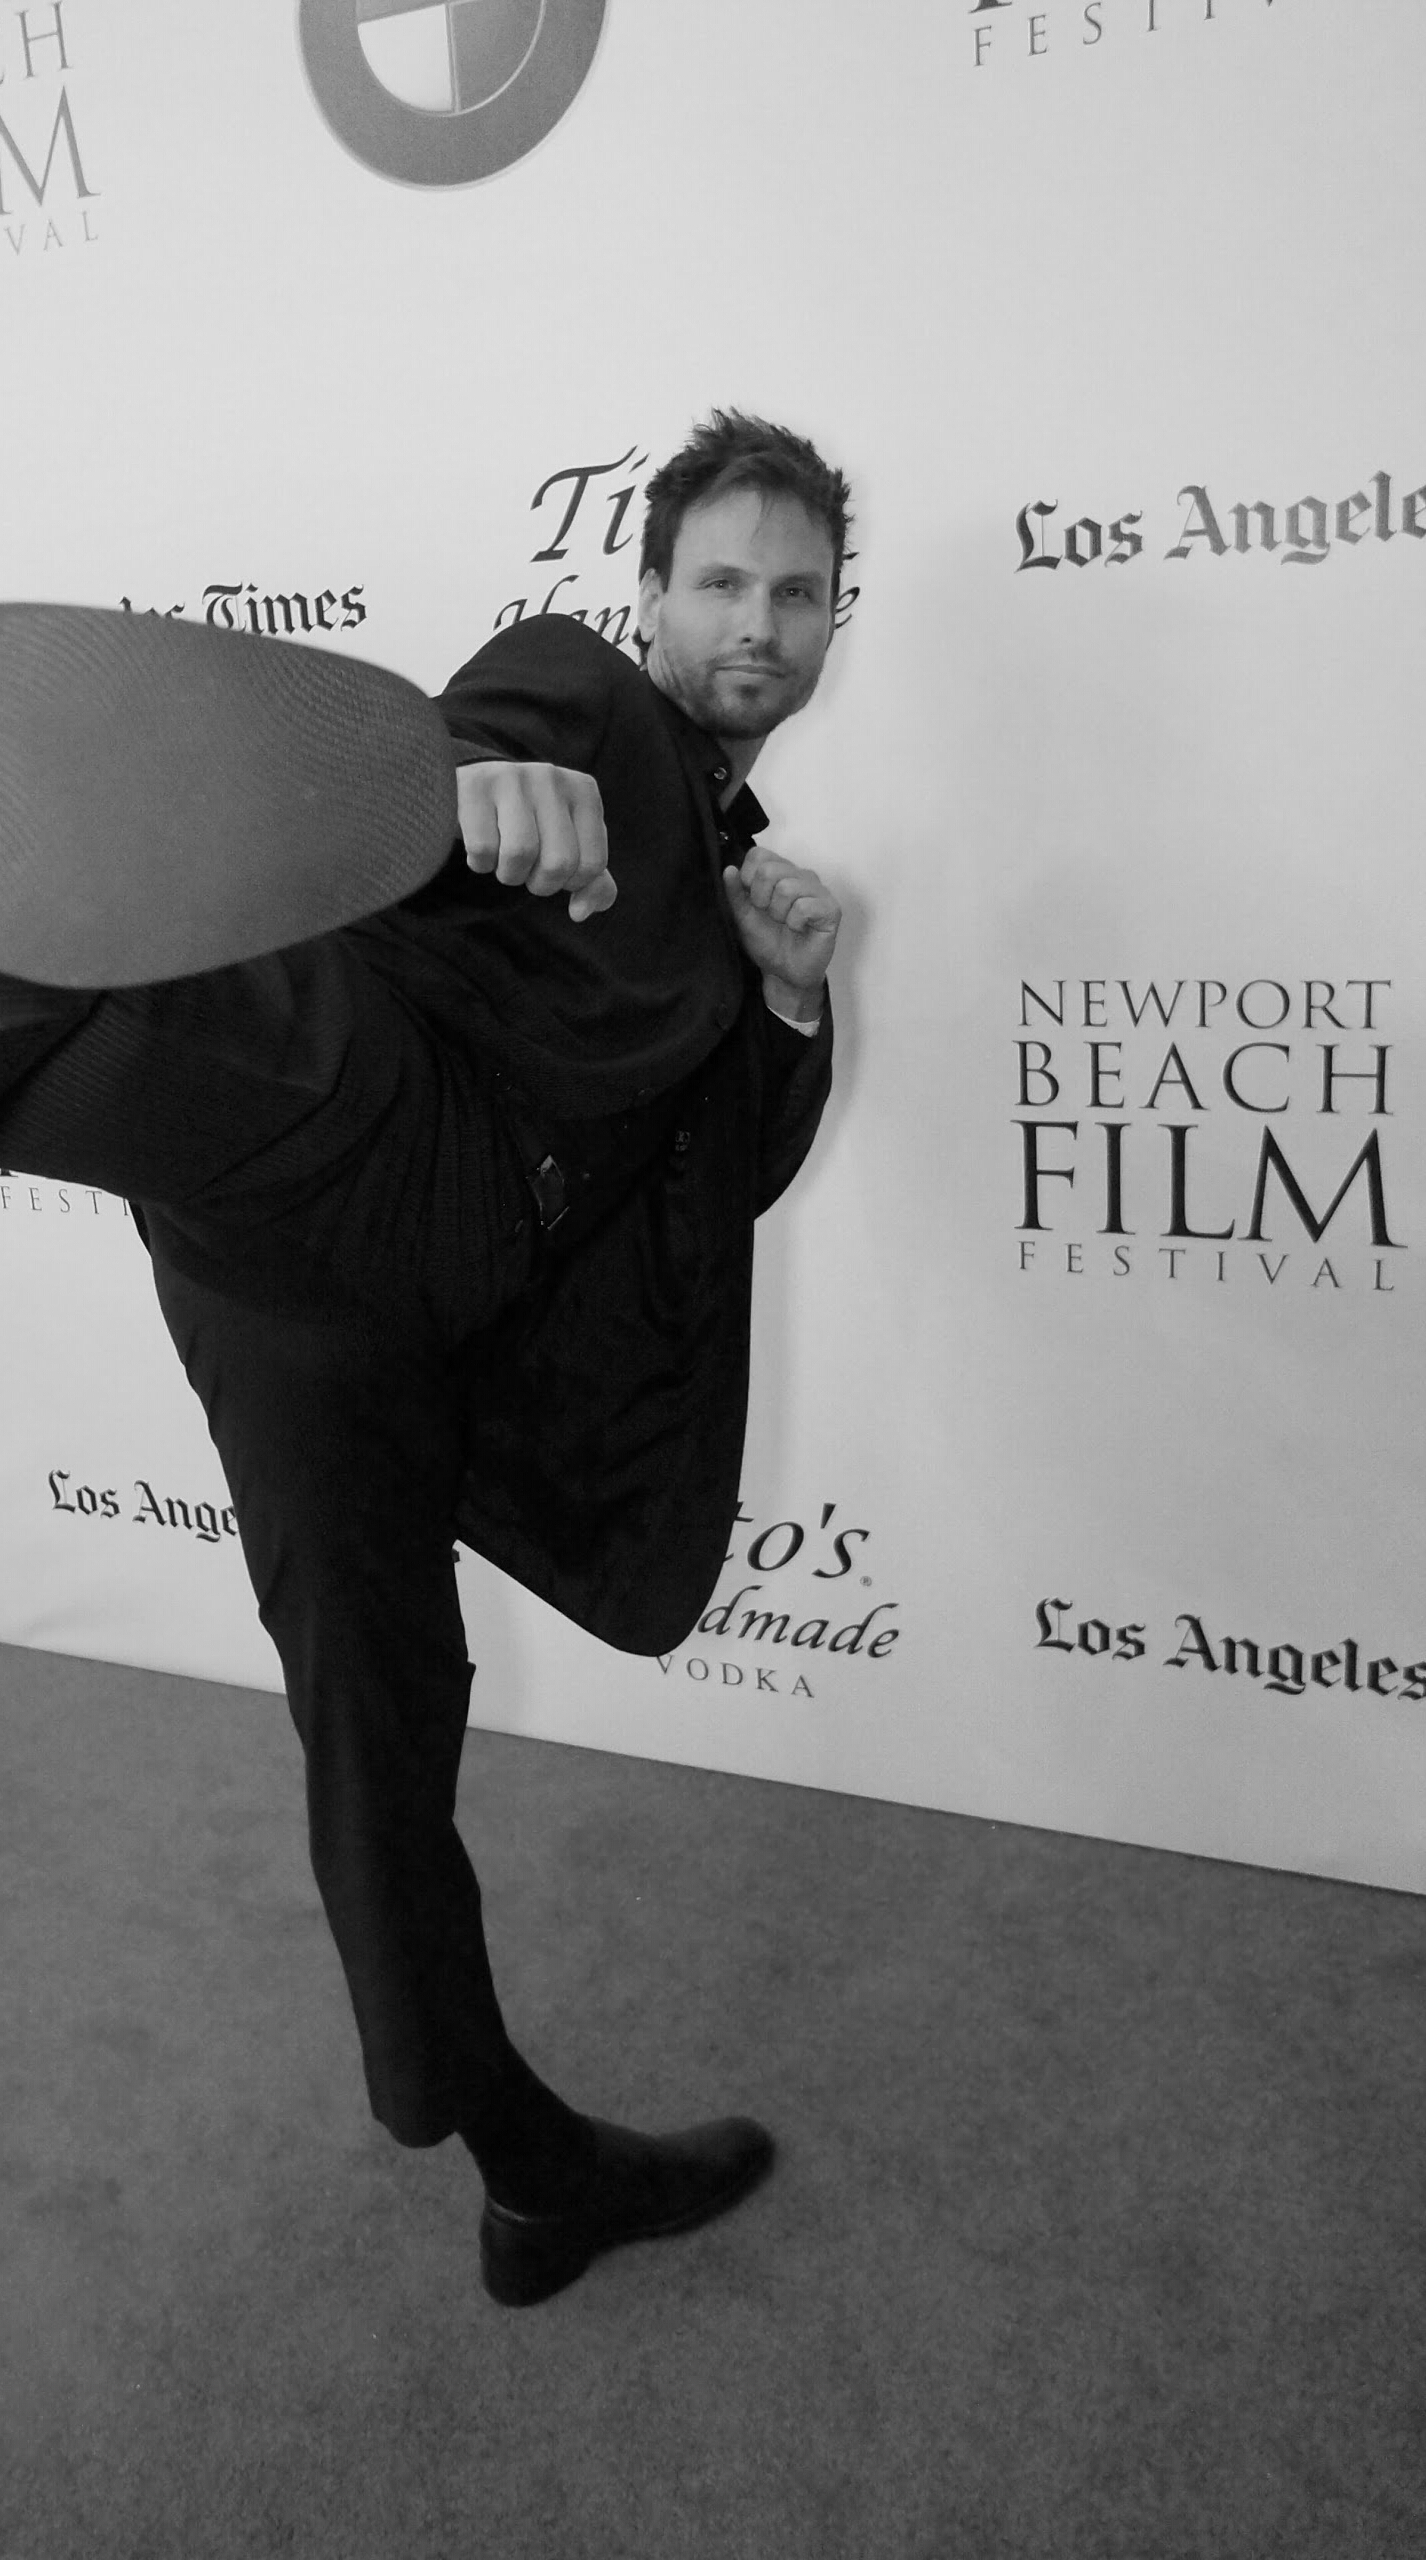 Tamas Menyhart at the Newport Beach film festival opening night with Russell Crowe's movie 